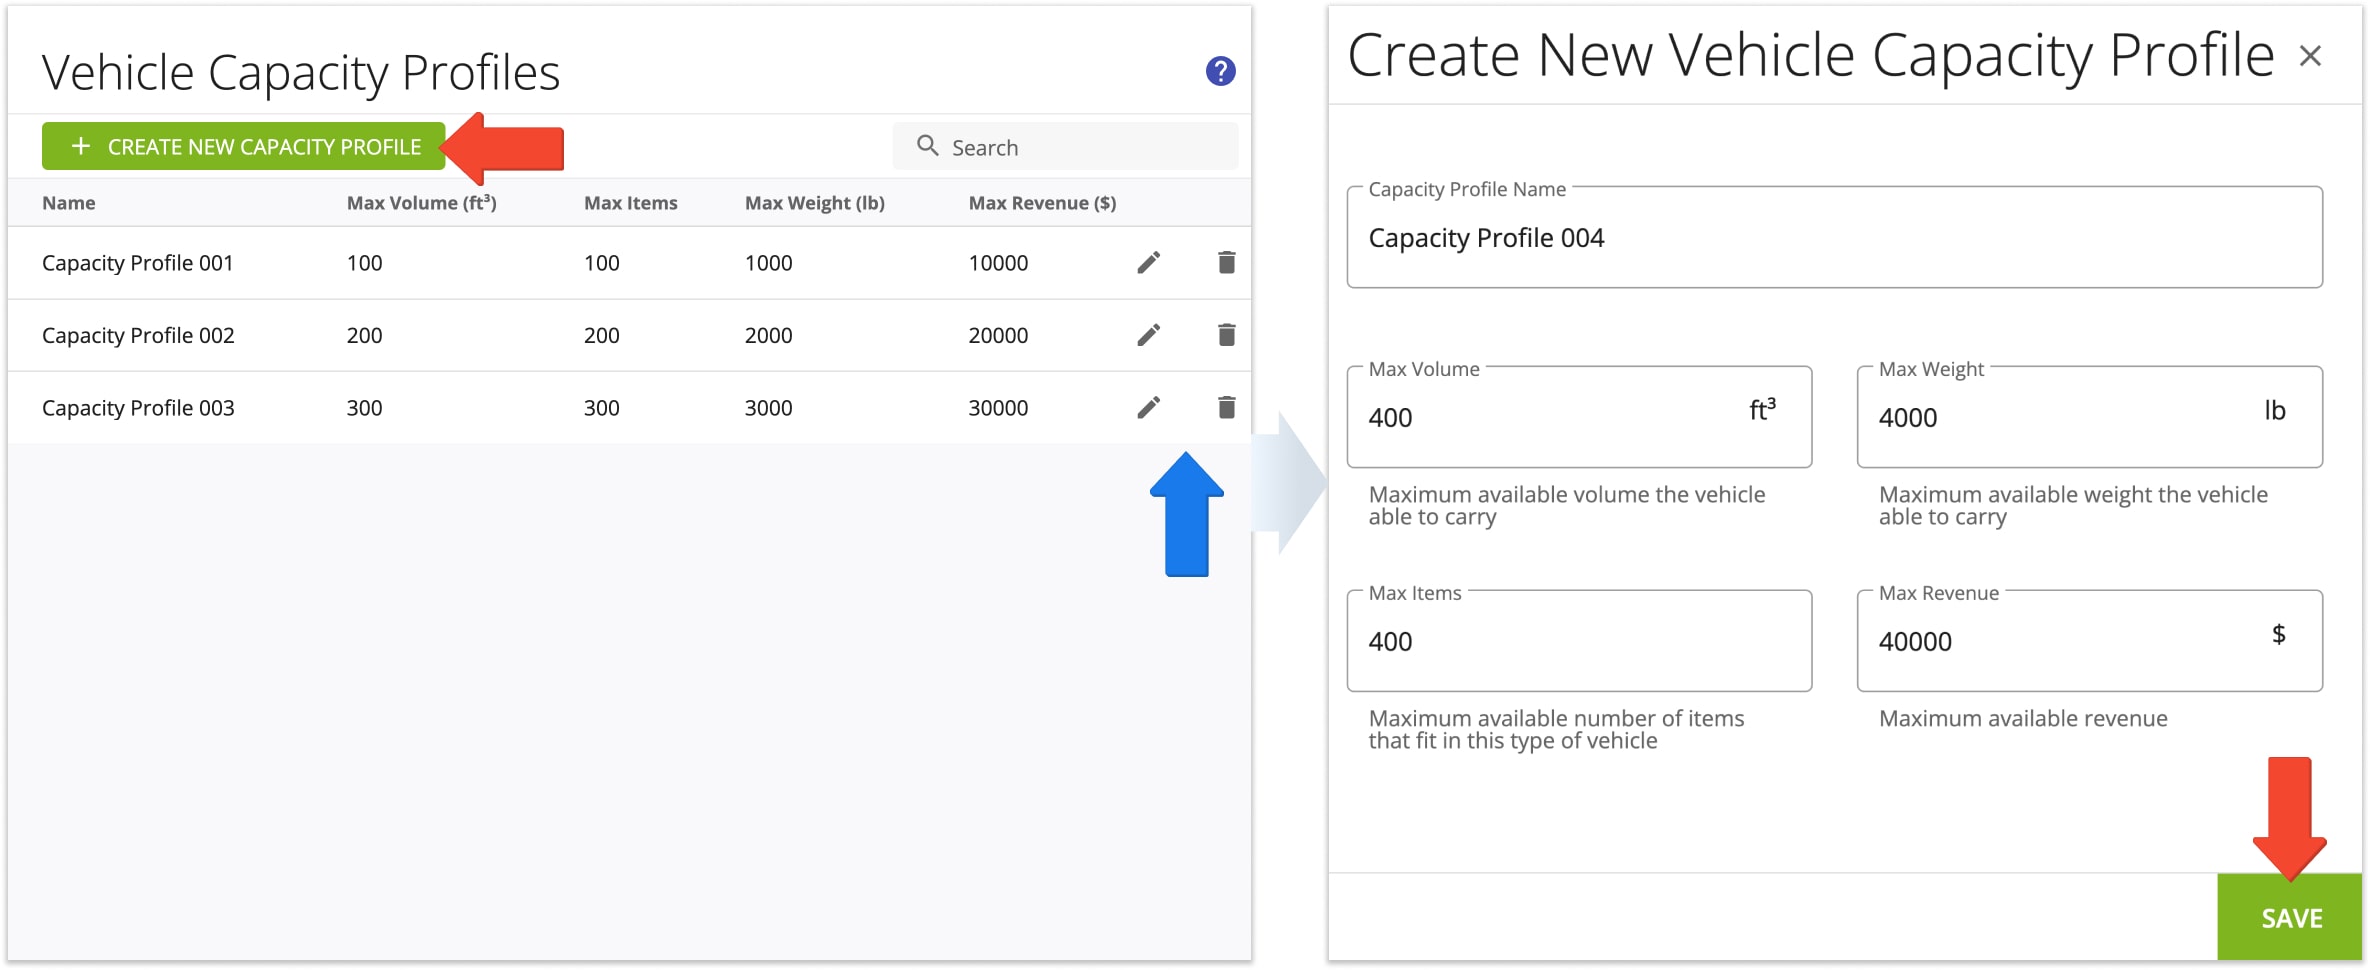 Once you've created one or multiple profiles, you can manage them on the Vehicle Capacity Profiles page.